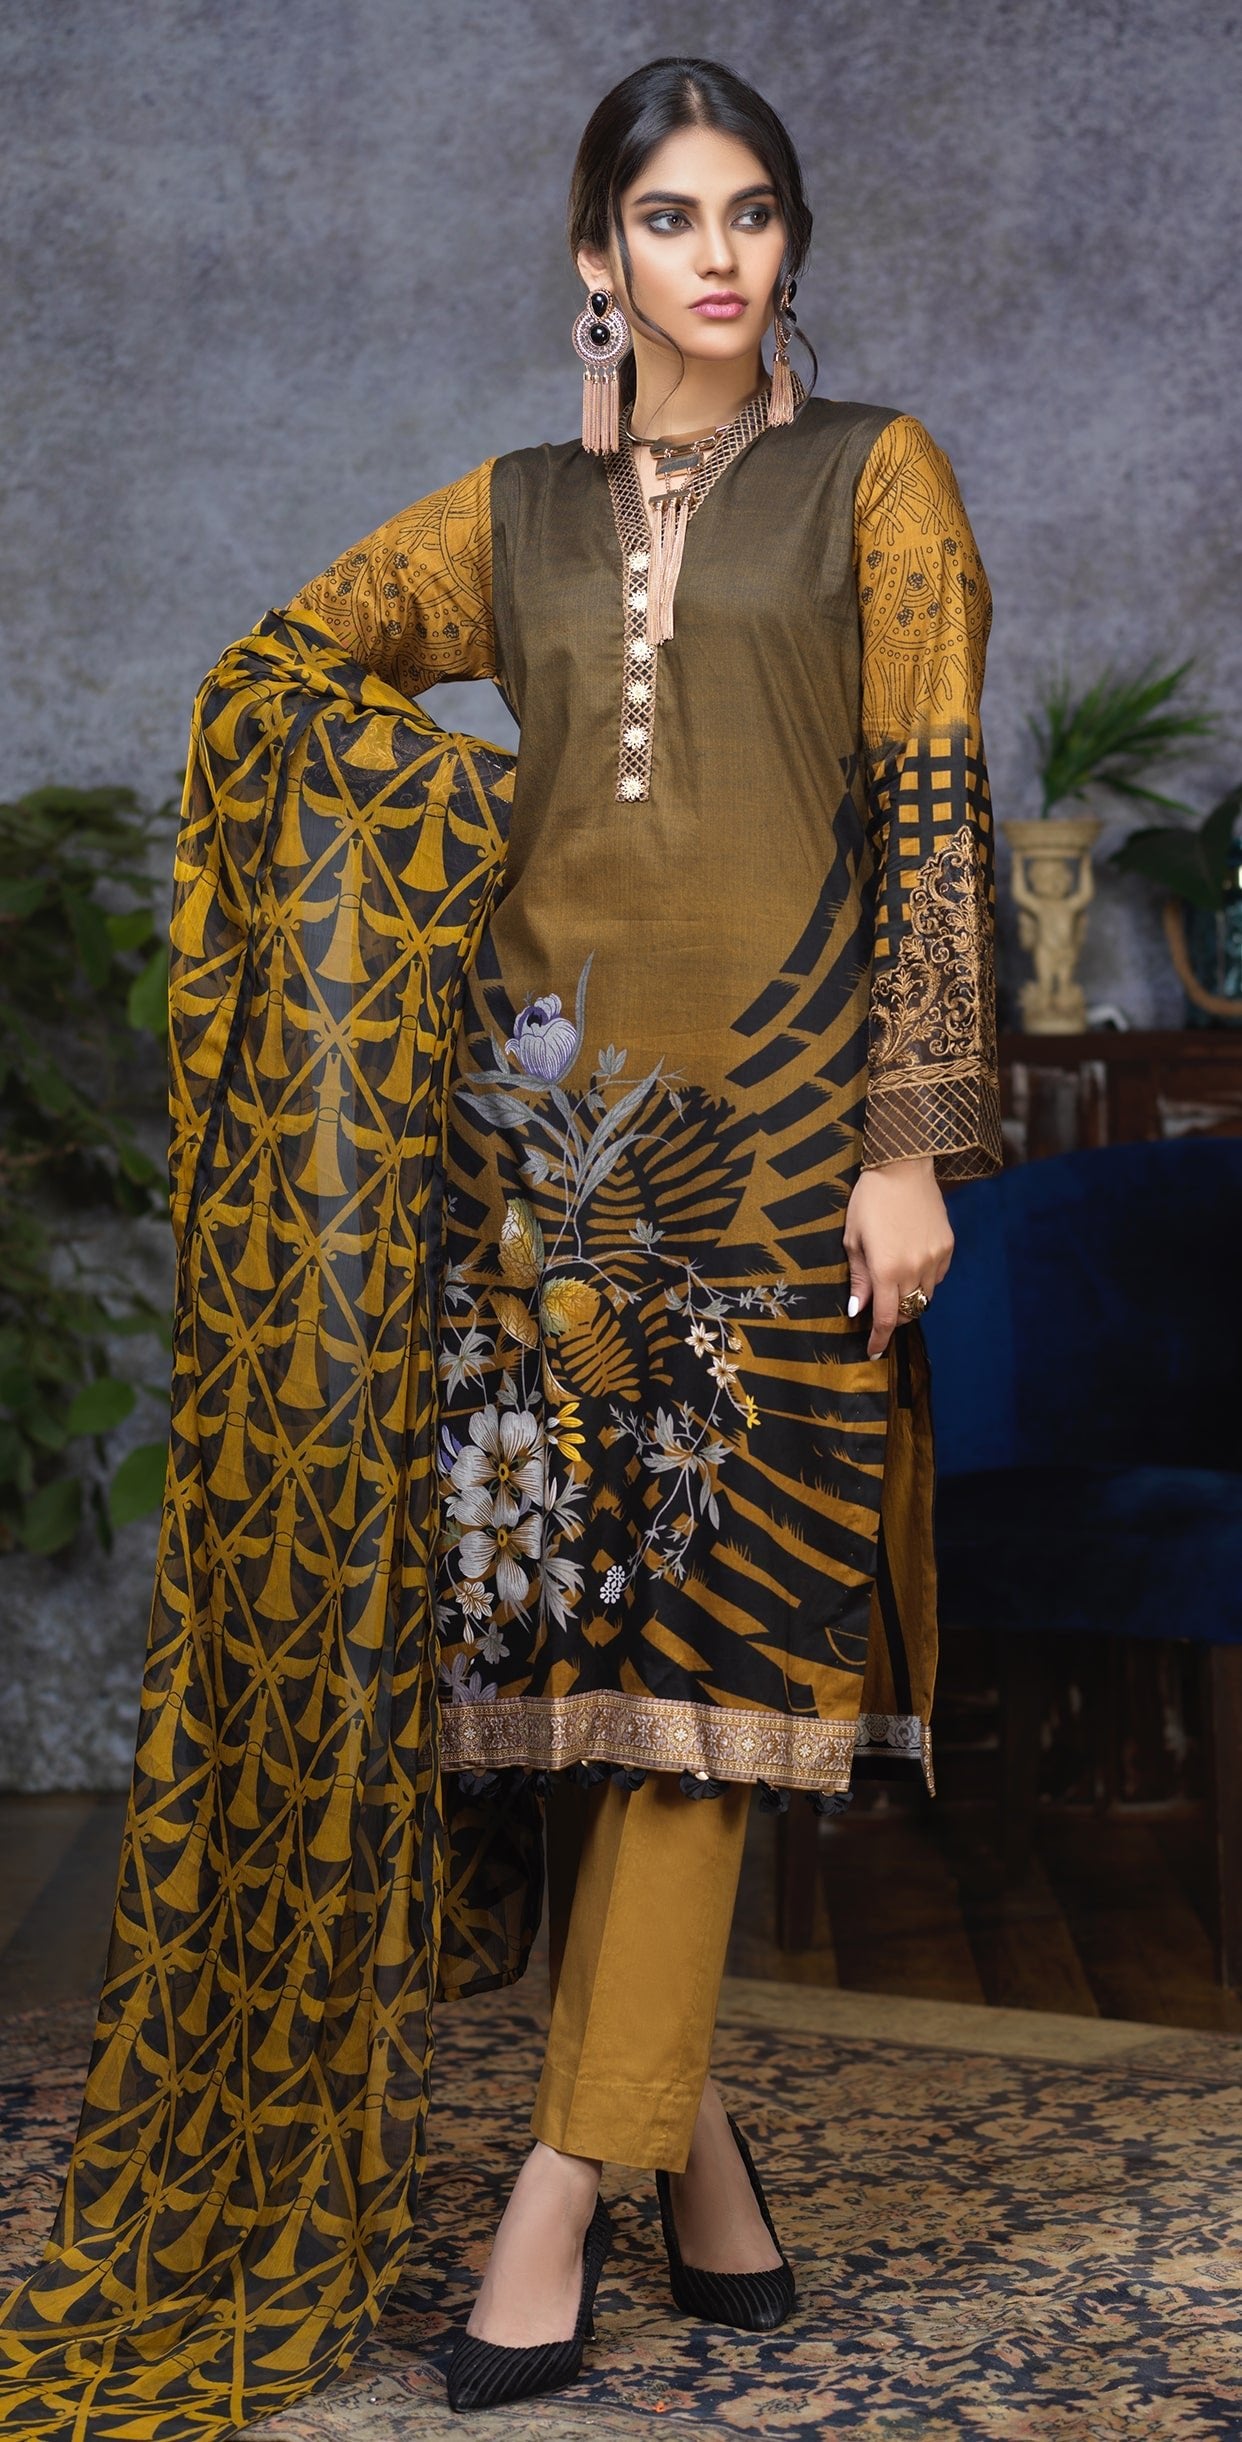 Stitched Printed Cambric Shirt with Embroidery Sleeves and Embroidered Neck Lace , Printed Chiffon Dupatta & Dyed Trouser (RC-172B) - SalitexOnline